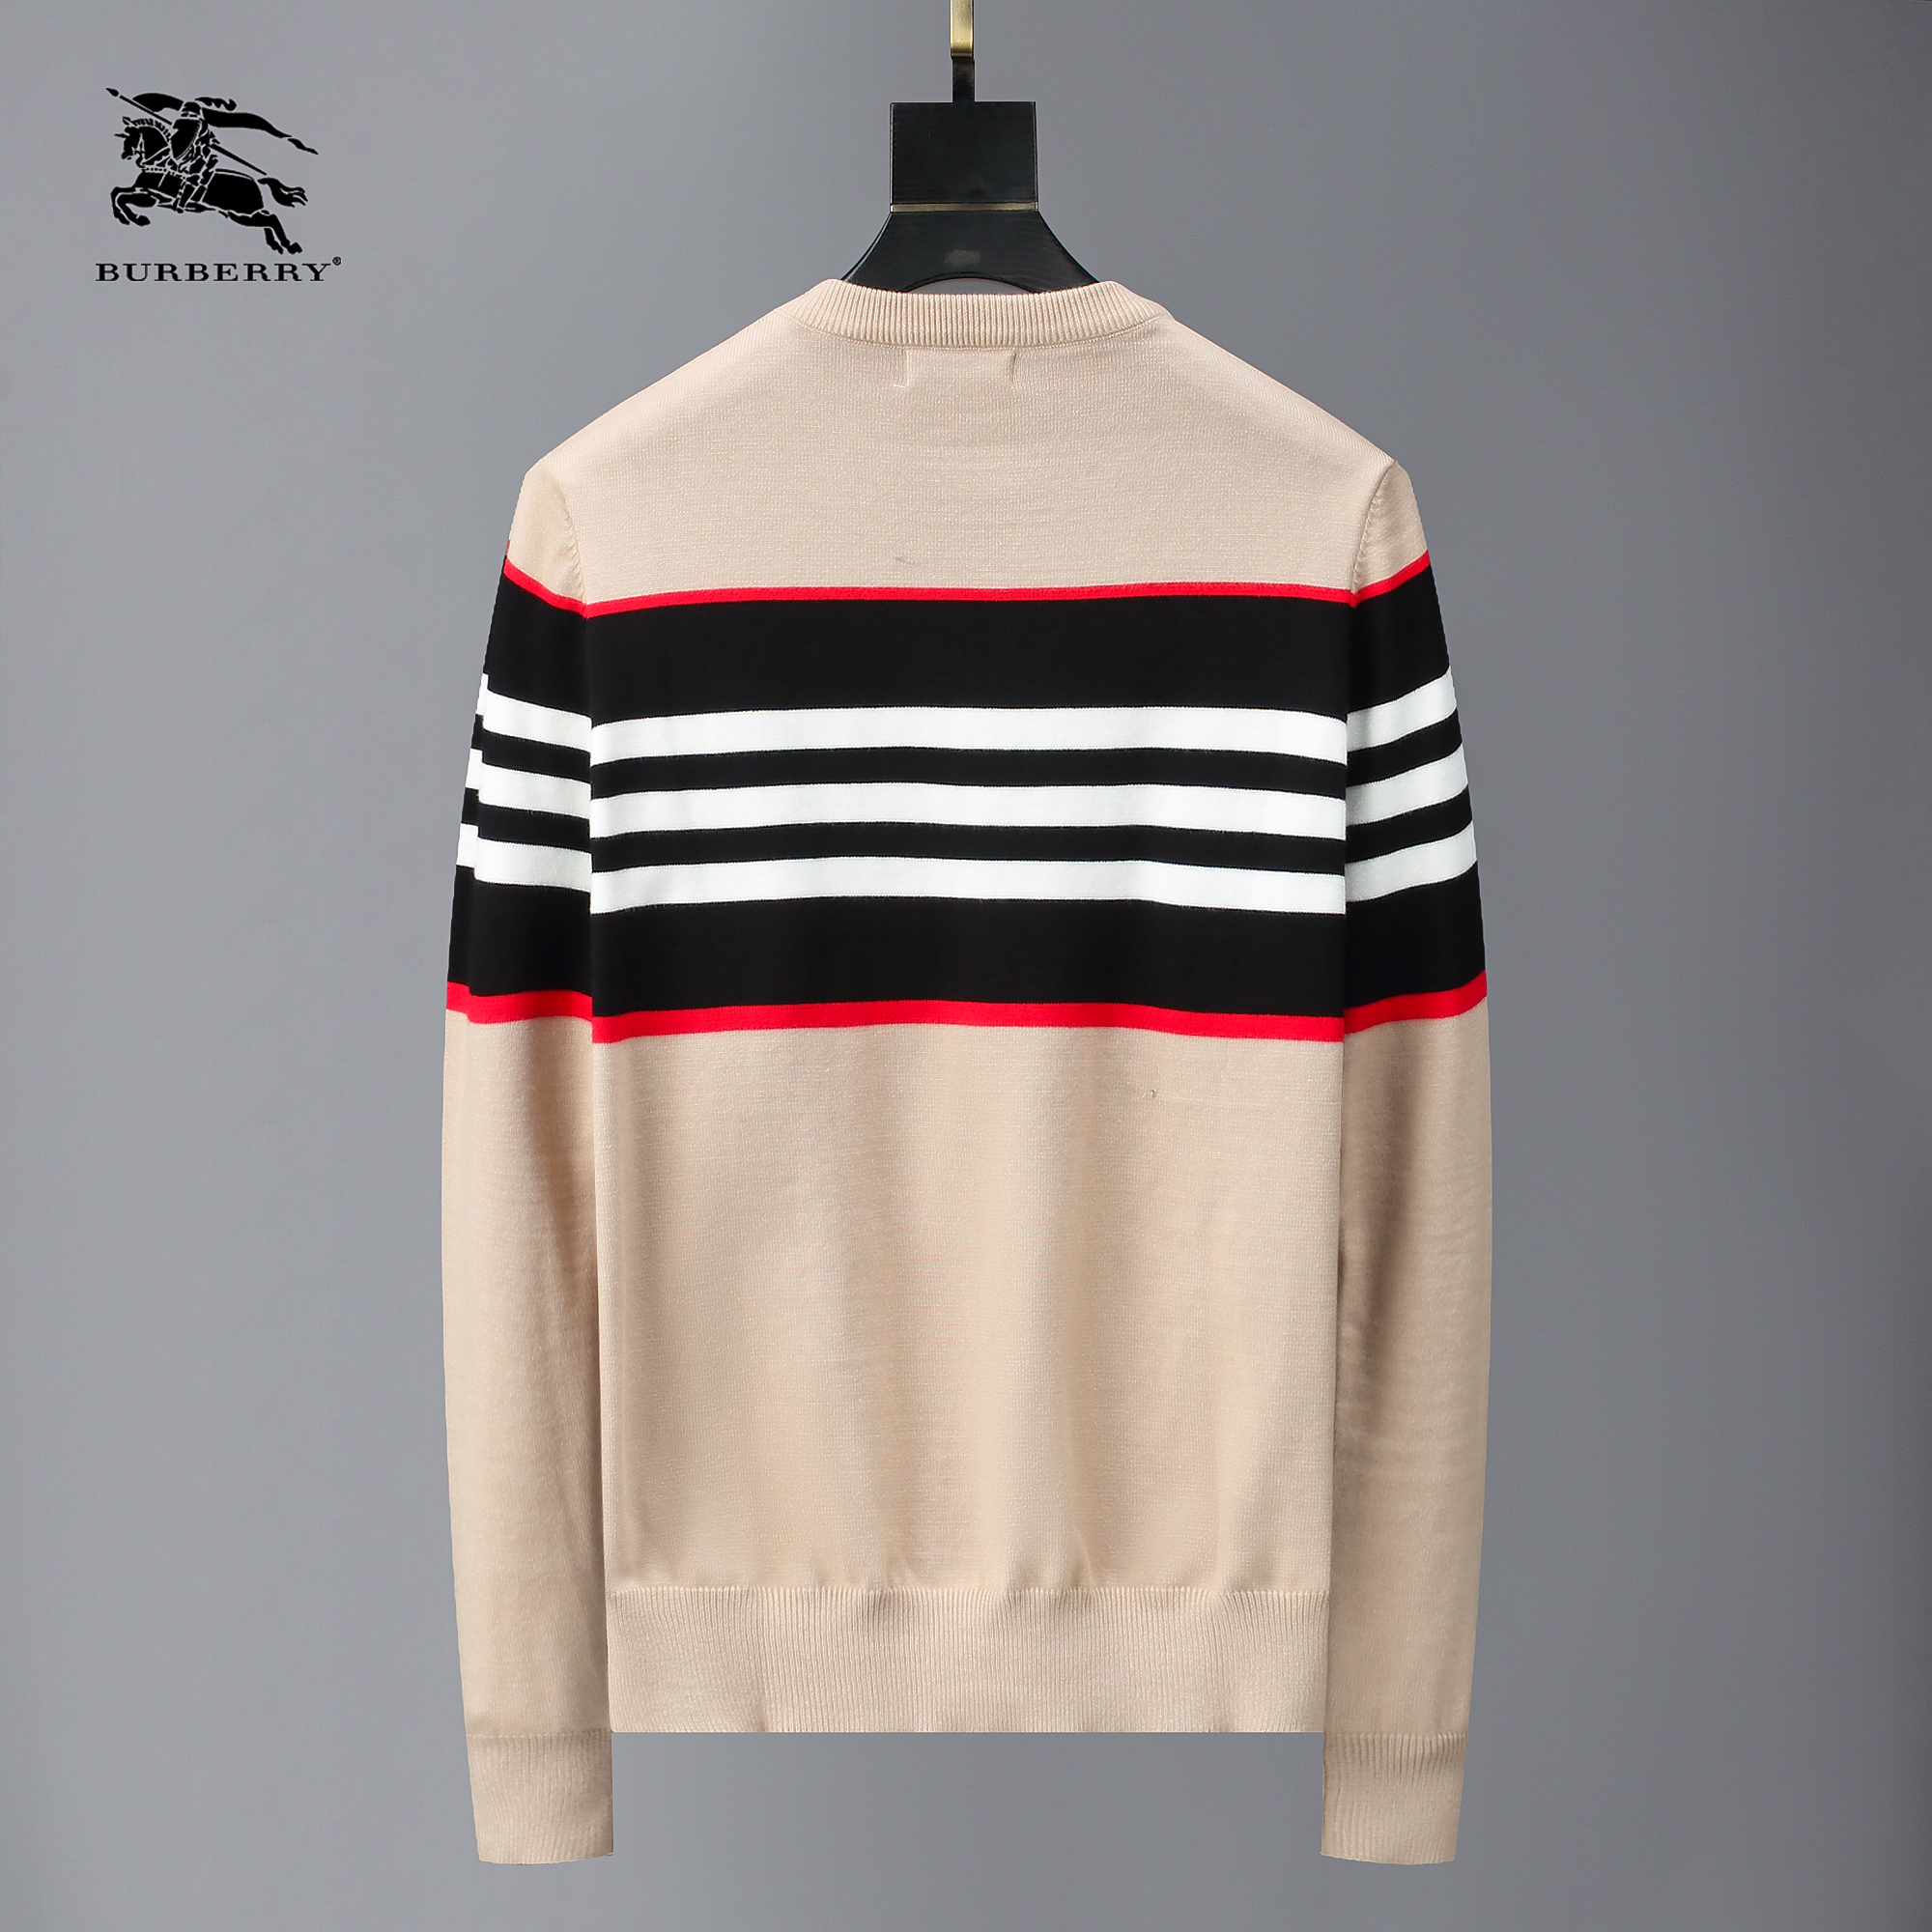 Burberry Round Neck Sweater For Men in 261335, cheap Burberry Sweater Men's, only $48!